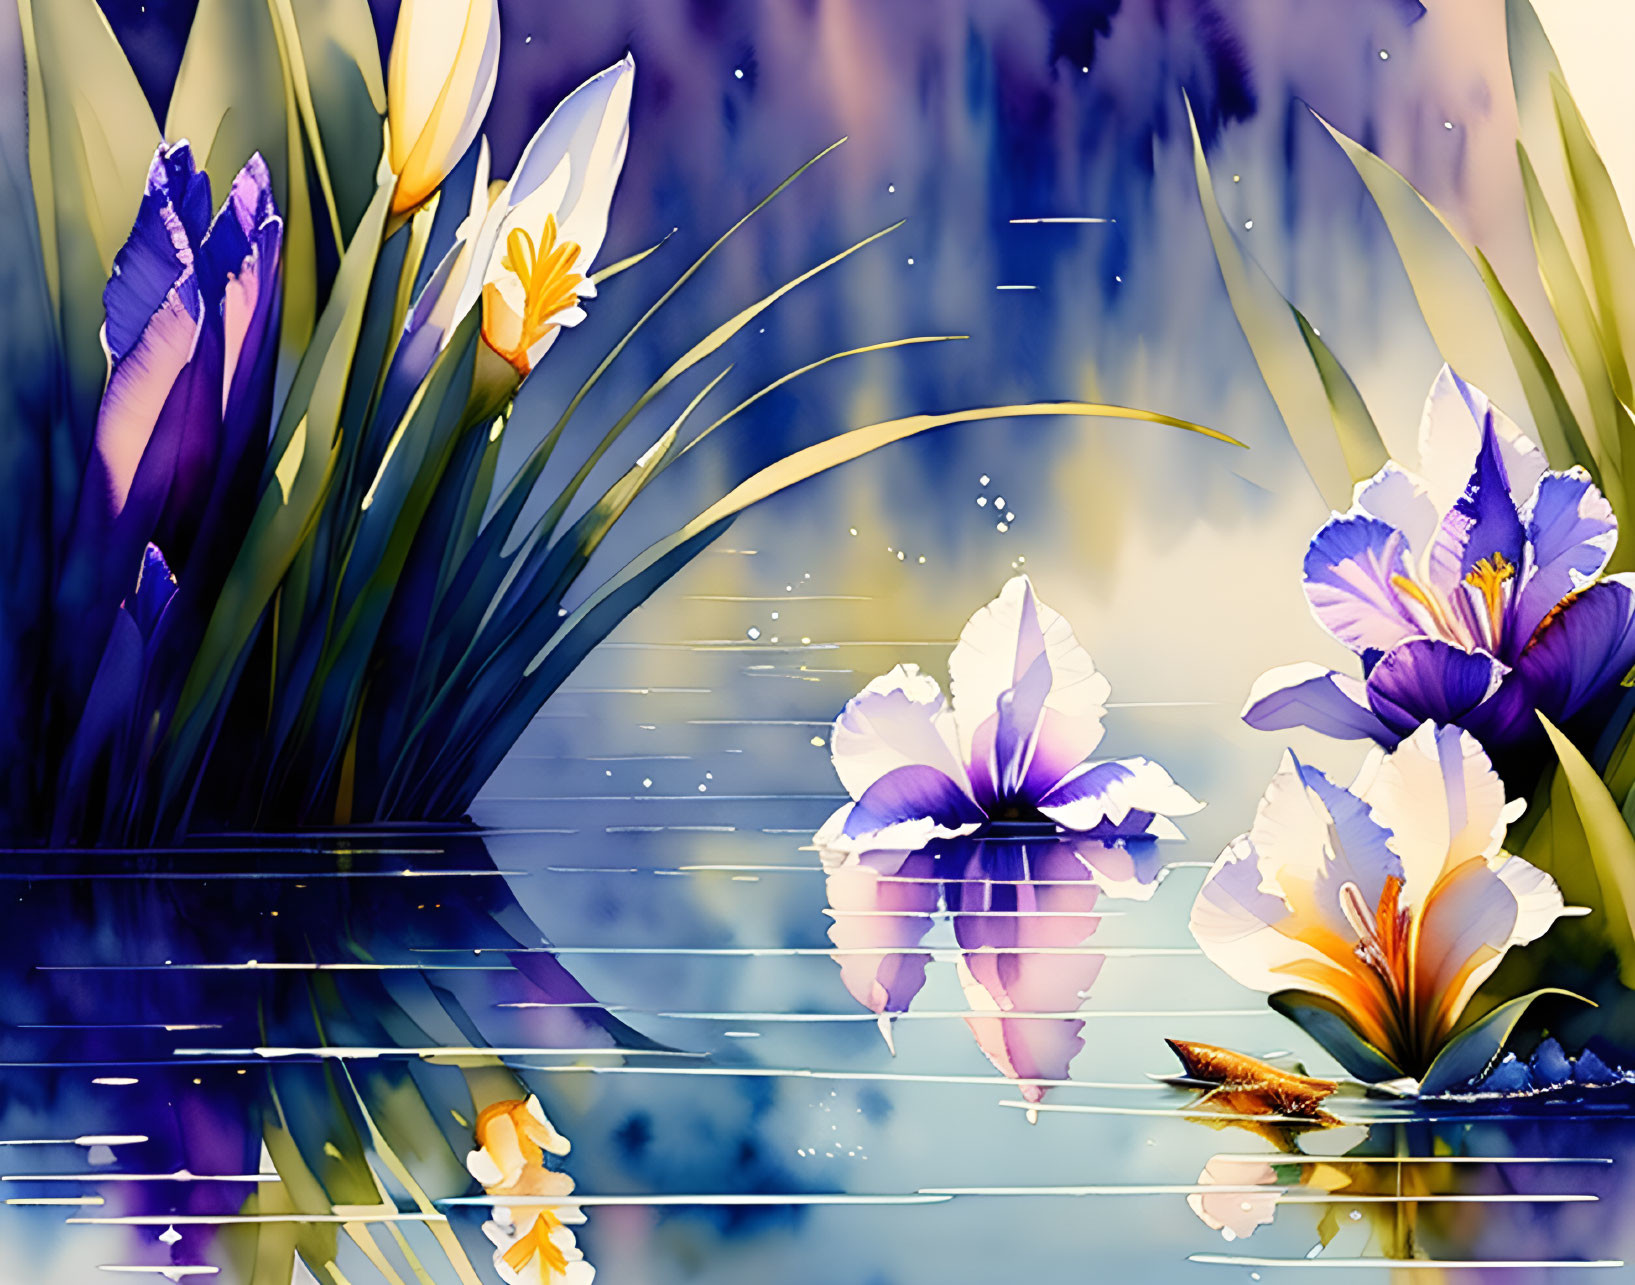 Purple and White Irises Illustration by Serene Water Body with Boat